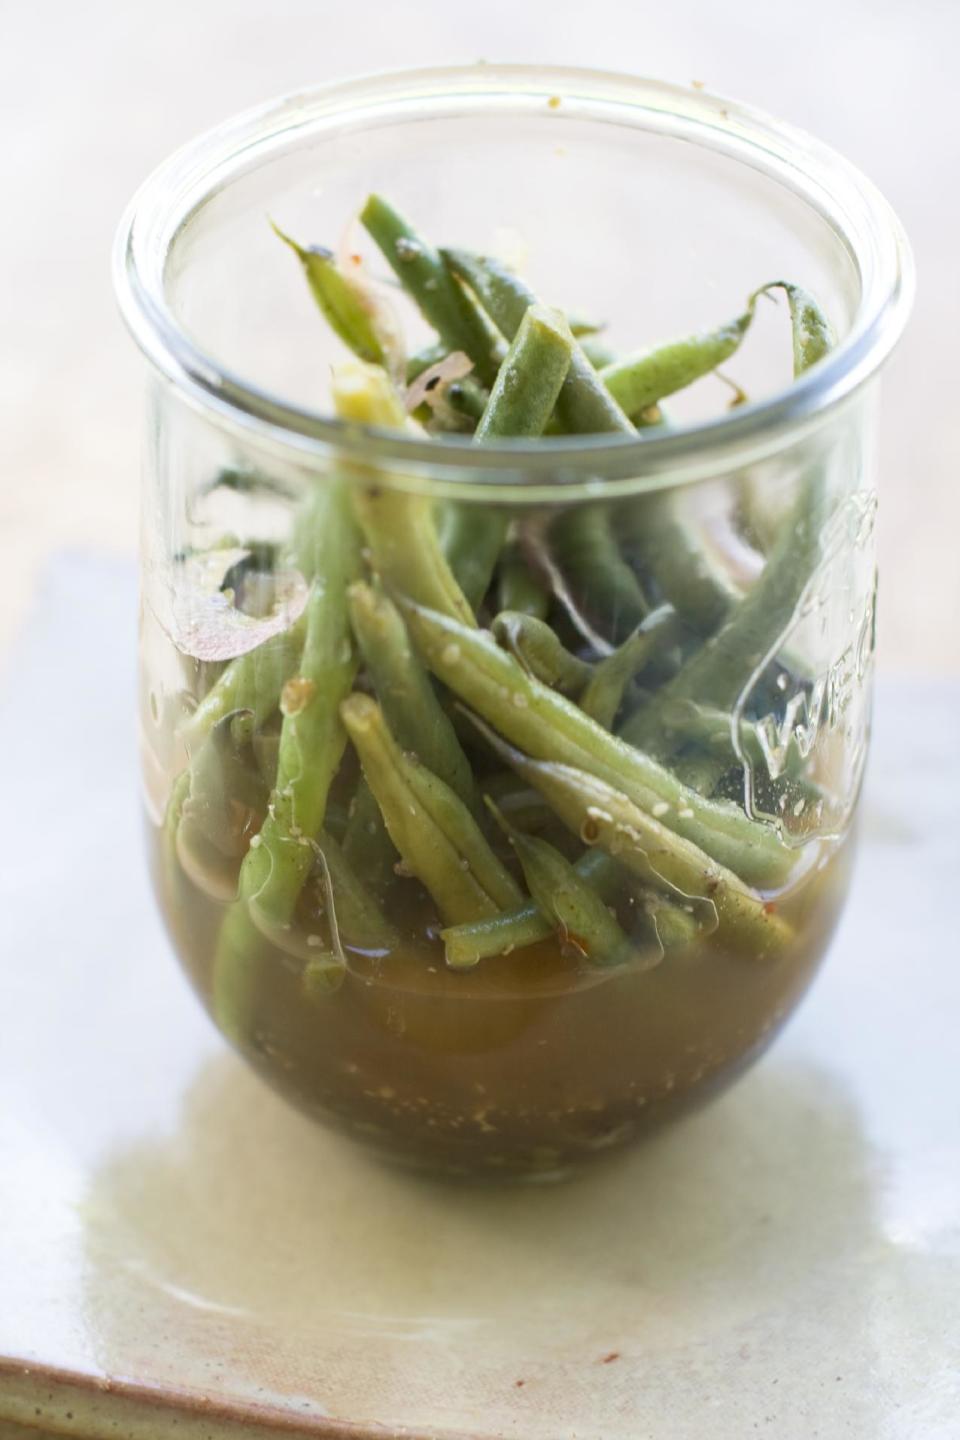 This July 15, 2013 photo shows fast-pickled green beans in Concord, N.H. (AP Photo/Matthew Mead)